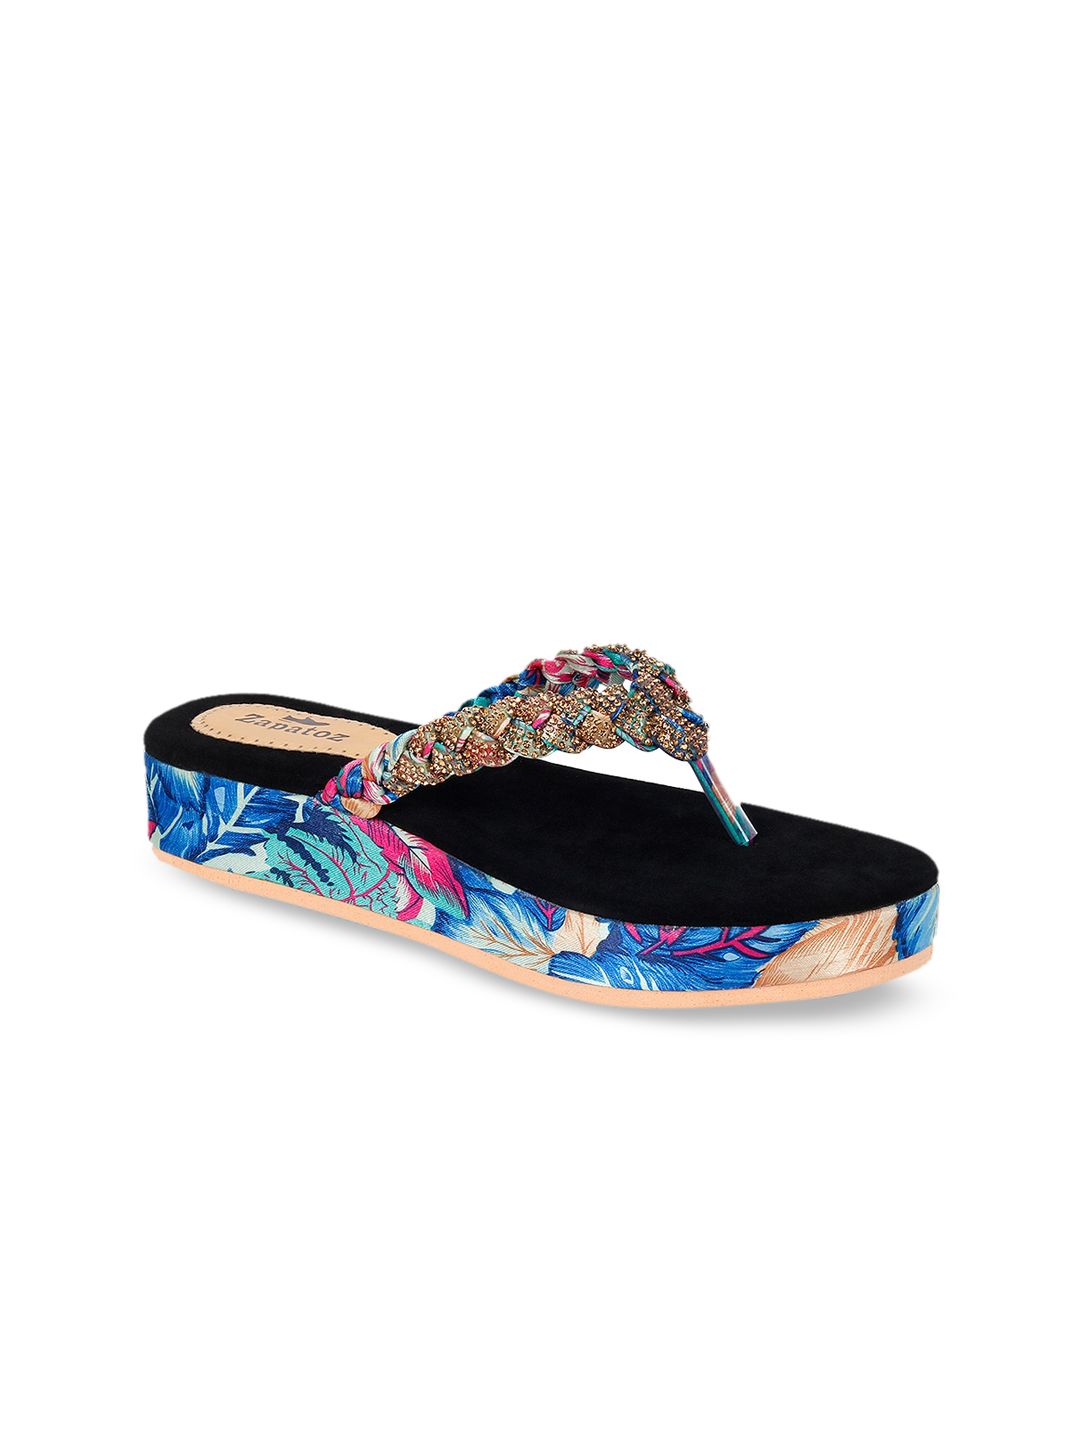 ZAPATOZ Women Blue & Gold-Toned Printed & Embellished Flatforms Price in India